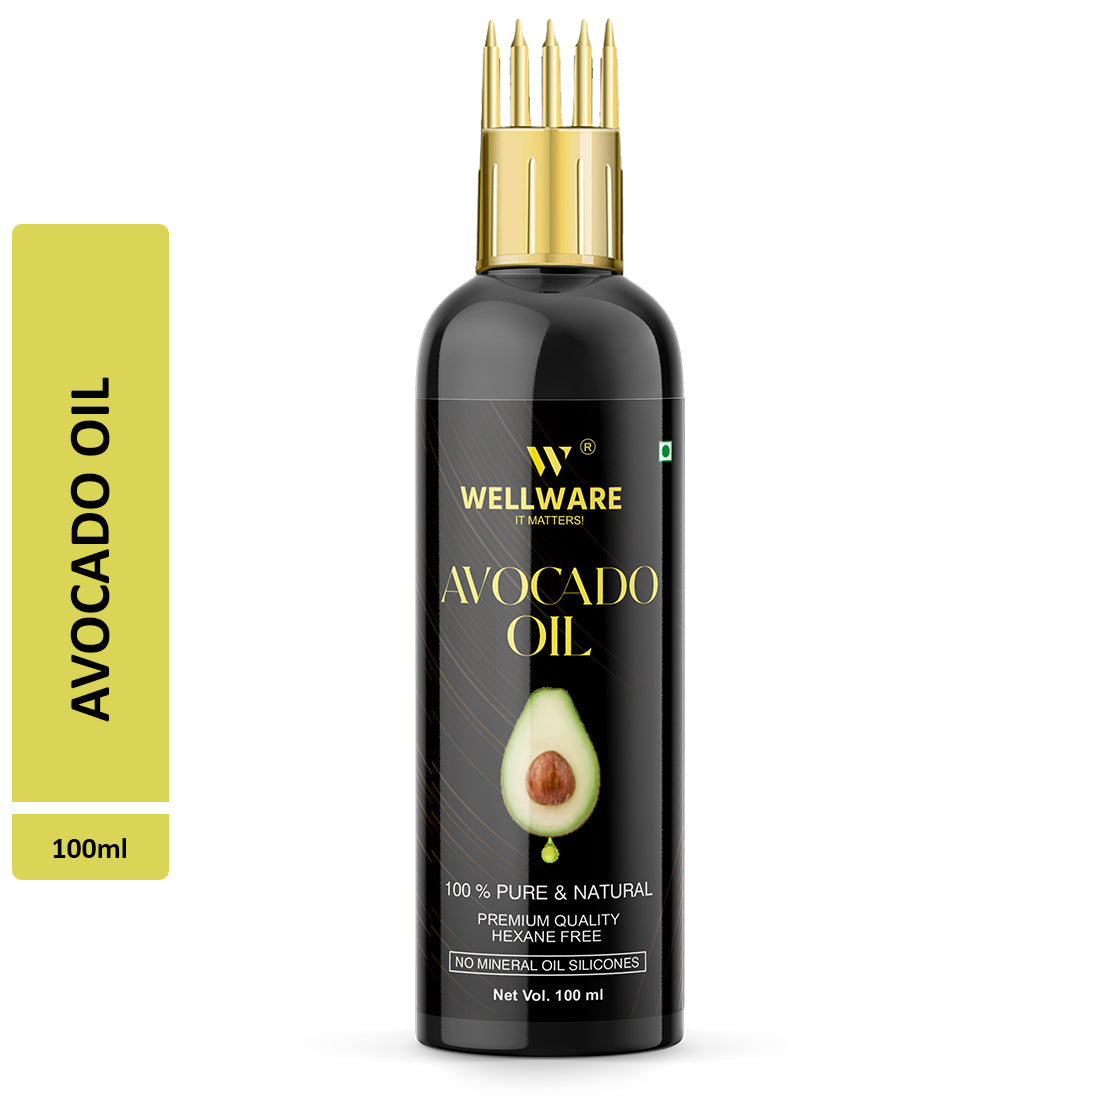 WELLWARE Cold Pressed Avocado Oil for Hair and Skin - WITH COMB APPLICATOR - Cold Pressed Hair Oil